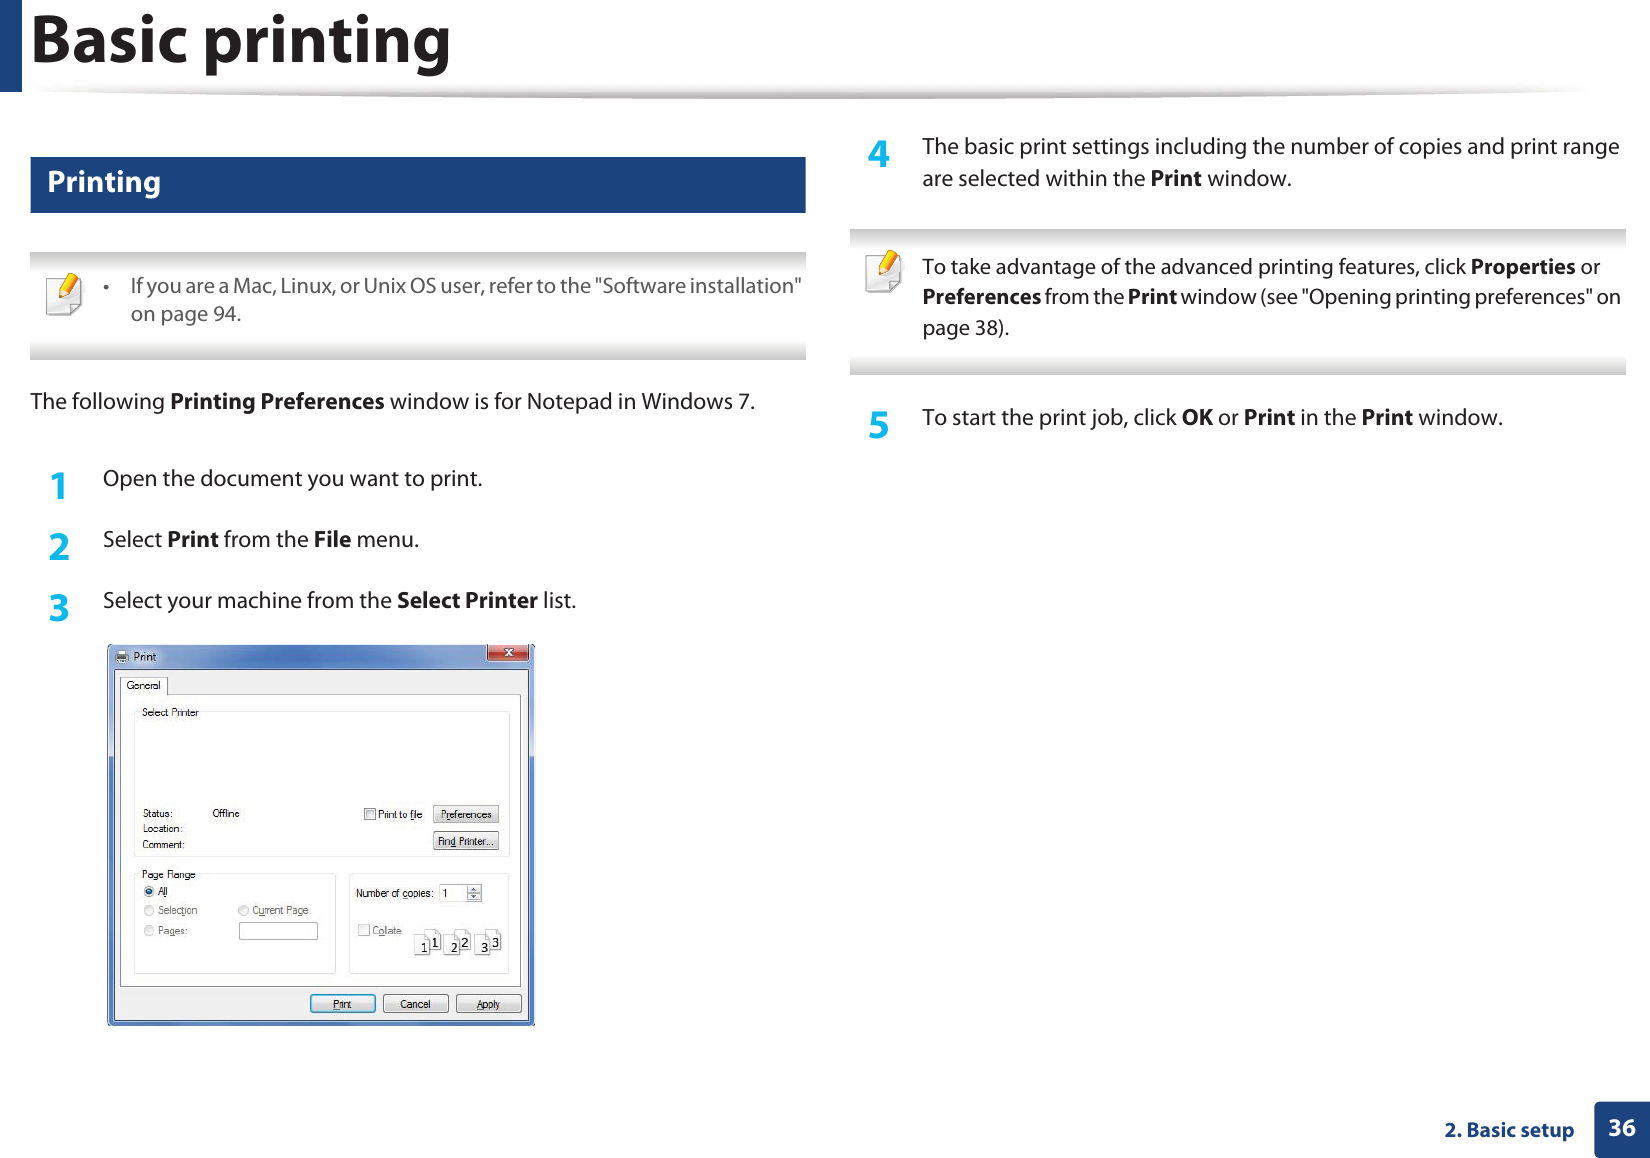 362. Basic setupBasic printing 7 Printing • If you are a Mac, Linux, or Unix OS user, refer to the &quot;Software installation&quot; on page 94. The following Printing Preferences window is for Notepad in Windows 7.1Open the document you want to print.2  Select Print from the File menu.3  Select your machine from the Select Printer list.4  The basic print settings including the number of copies and print range are selected within the Print window.  To take advantage of the advanced printing features, click Properties or Preferences from the Print window (see &quot;Opening printing preferences&quot; on page 38). 5  To start the print job, click OK or Print in the Print window.